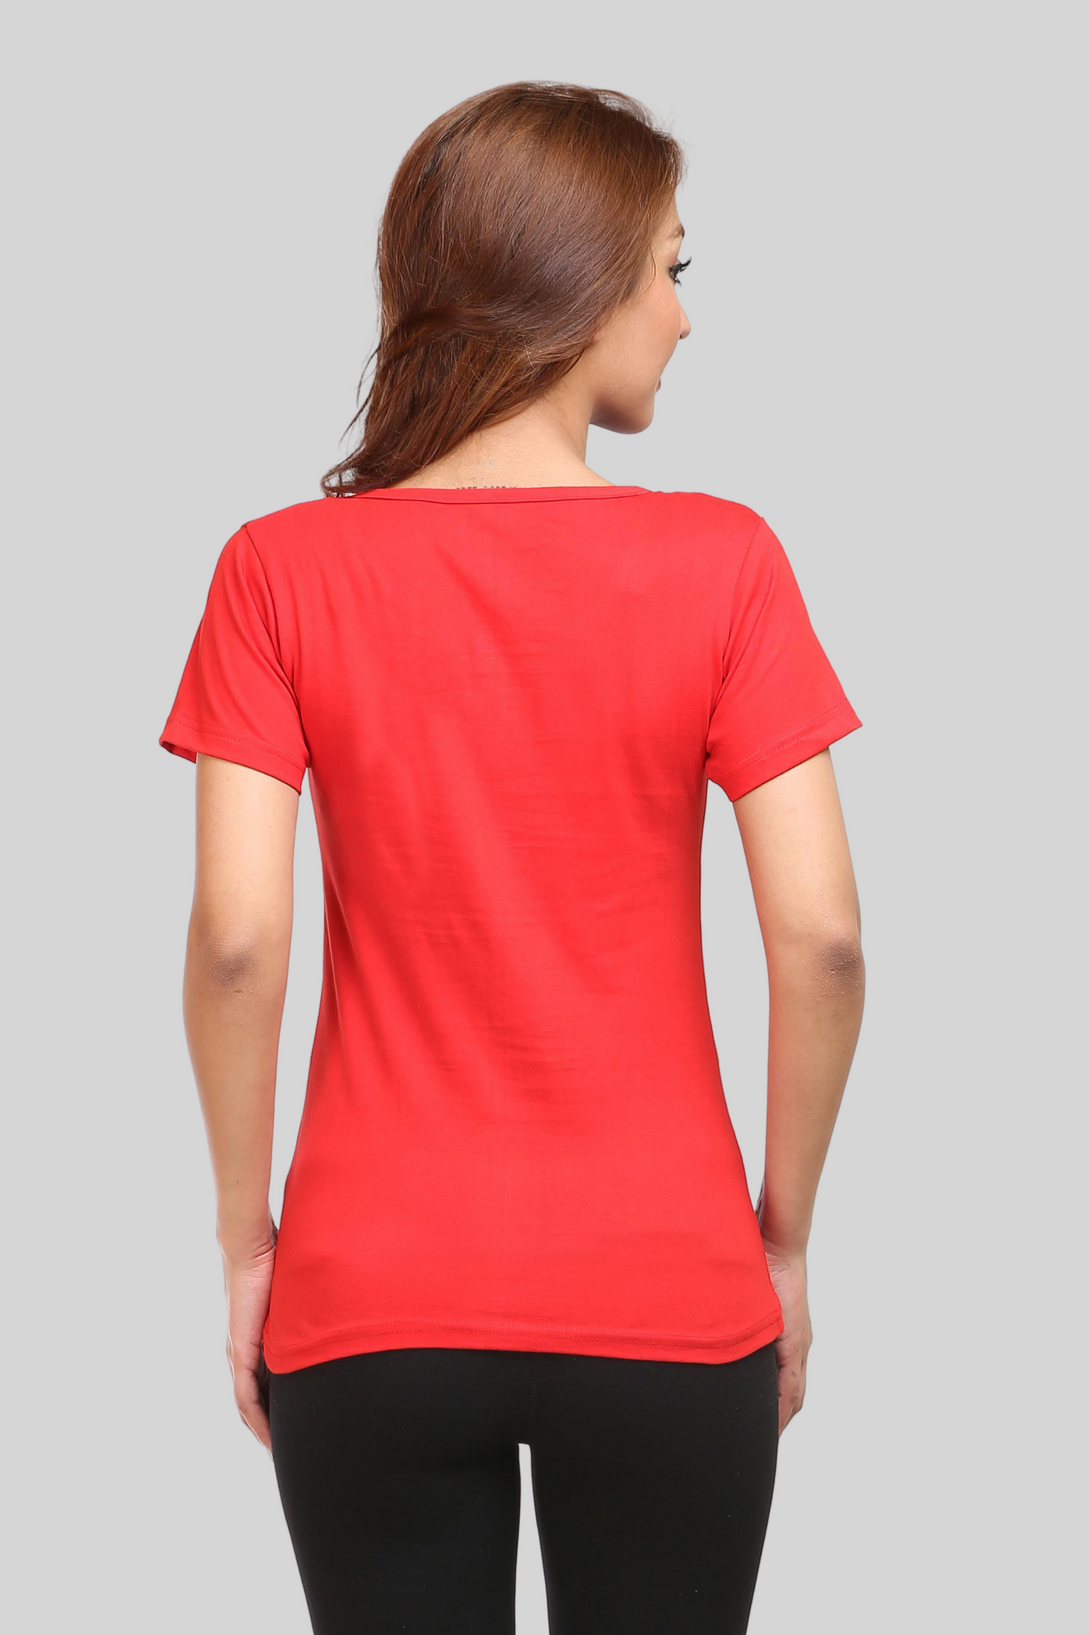 Red Scoop Neck T-Shirt For Women - WowWaves - 2